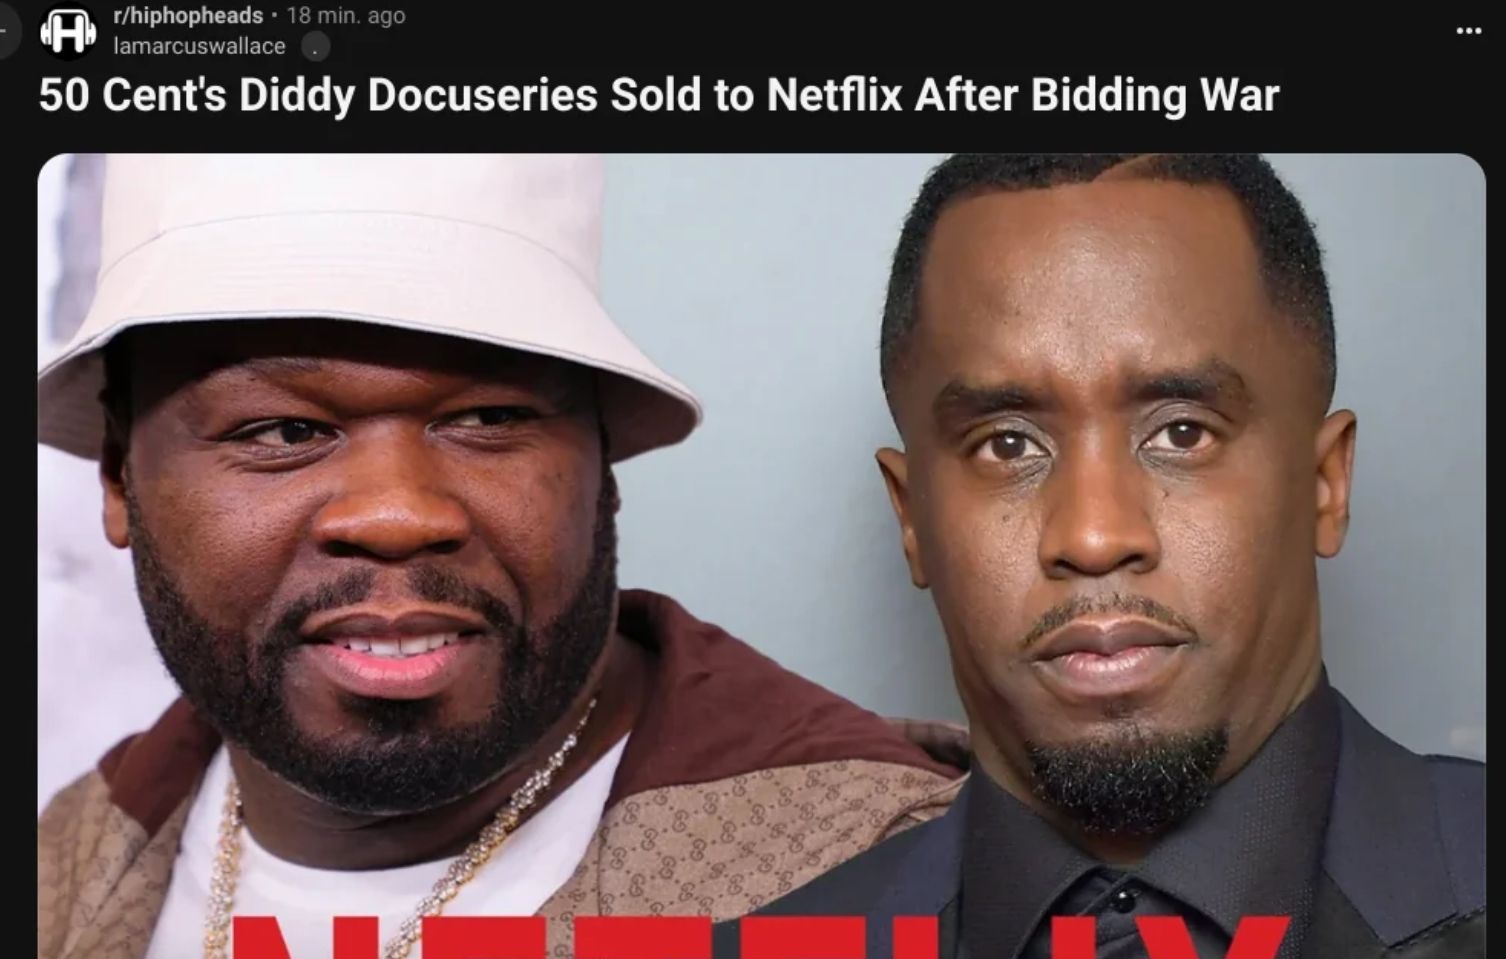 H
r/hiphopheads ⚫ 18 min. ago
lamarcuswallace
50 Cent's Diddy Docuseries Sold to Netflix After Bidding War